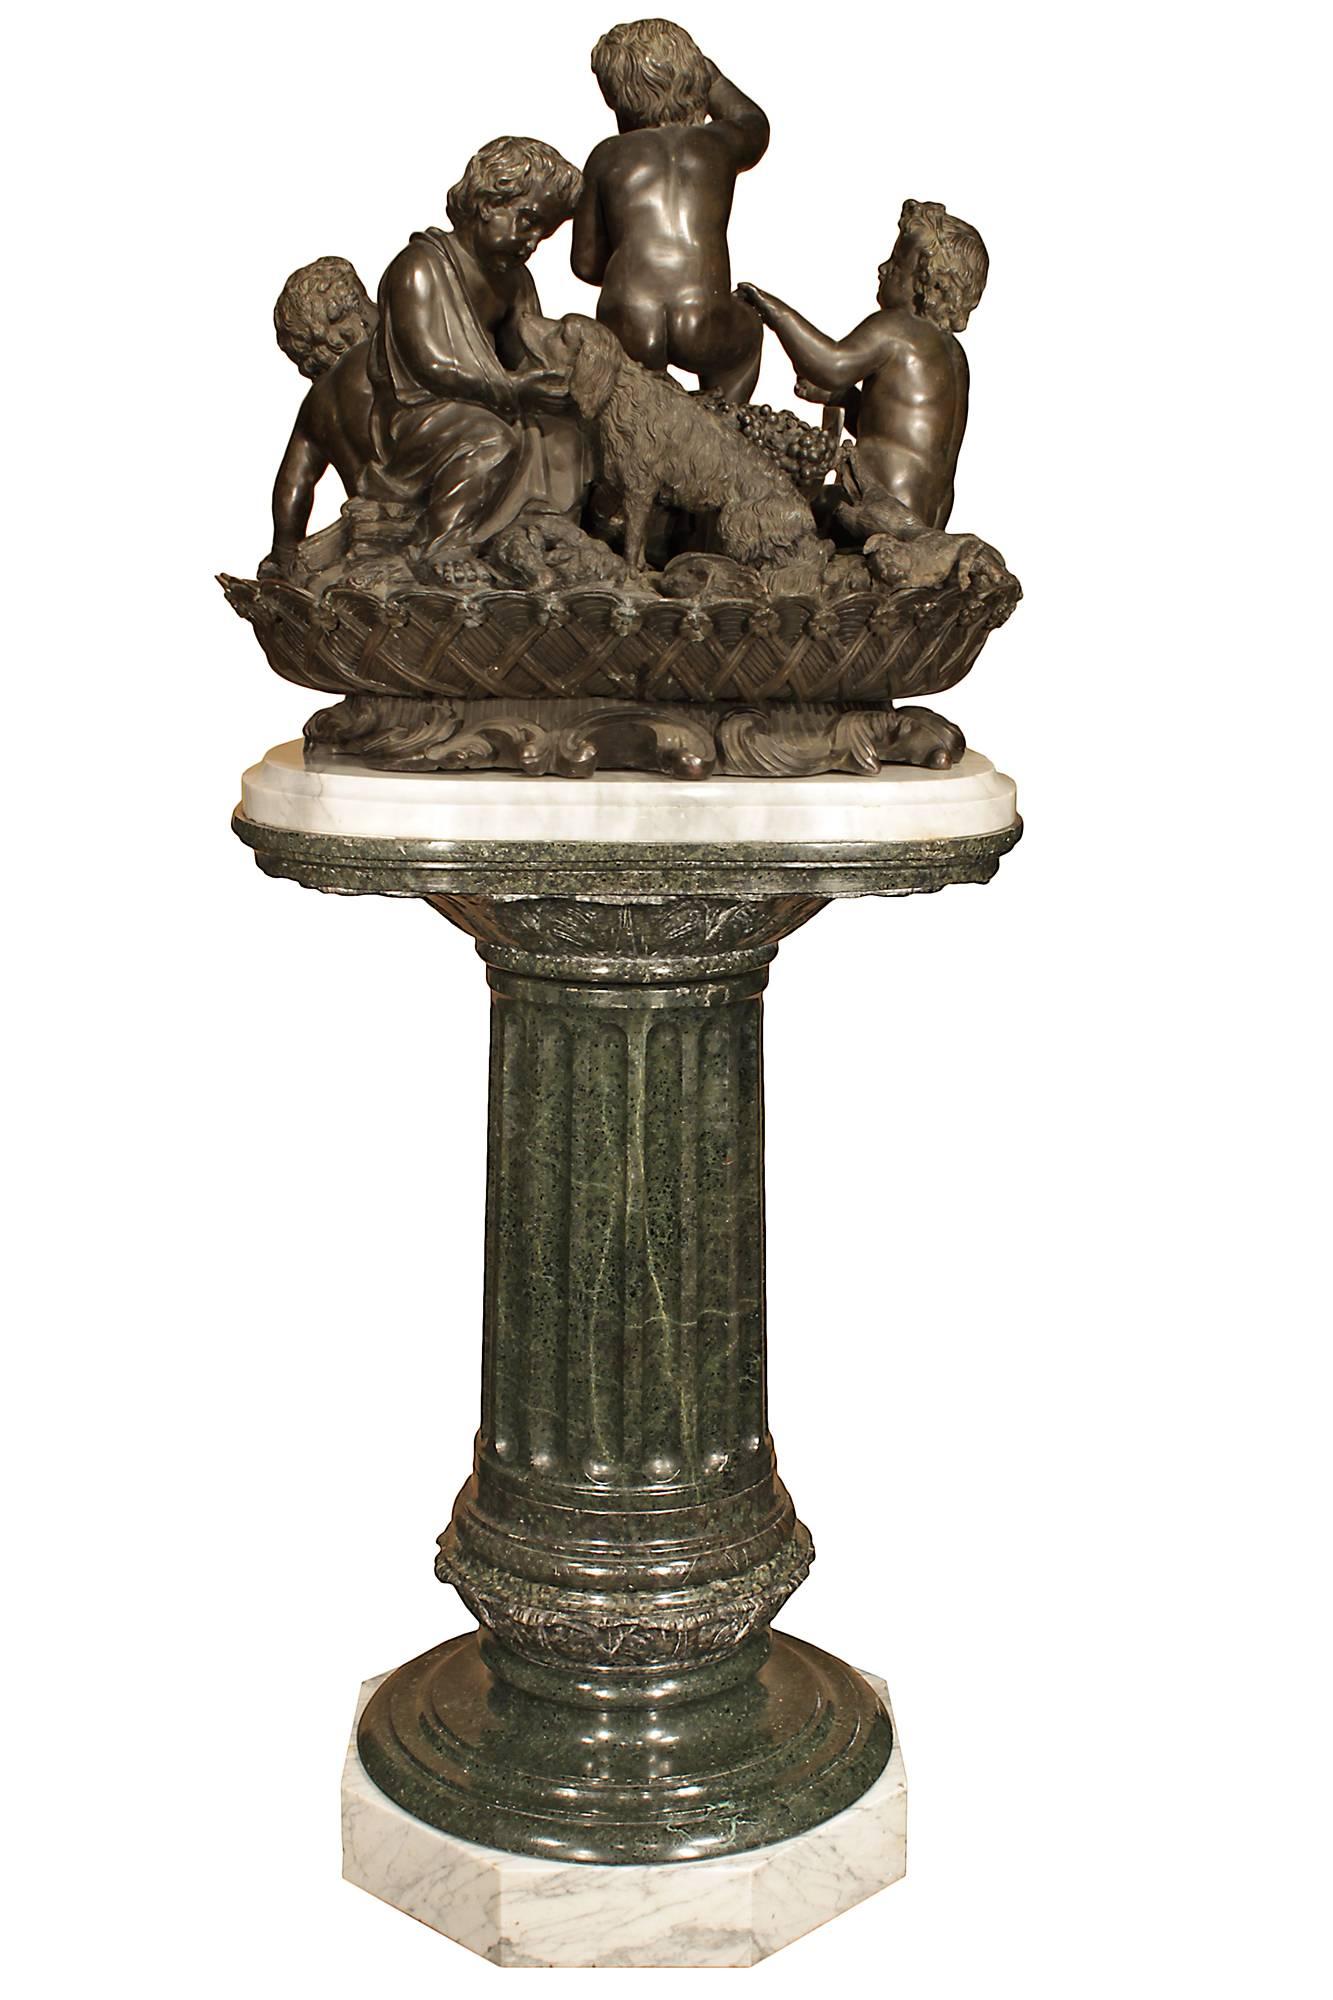 A magnificent French 19th century patinated bronze of The Four Seasons on a marble pedestal. Raised on an octagonal white Carrara marble base, the Vert Antique stepped sole and reeded column has a white Carrara marble-top. The very impressive and